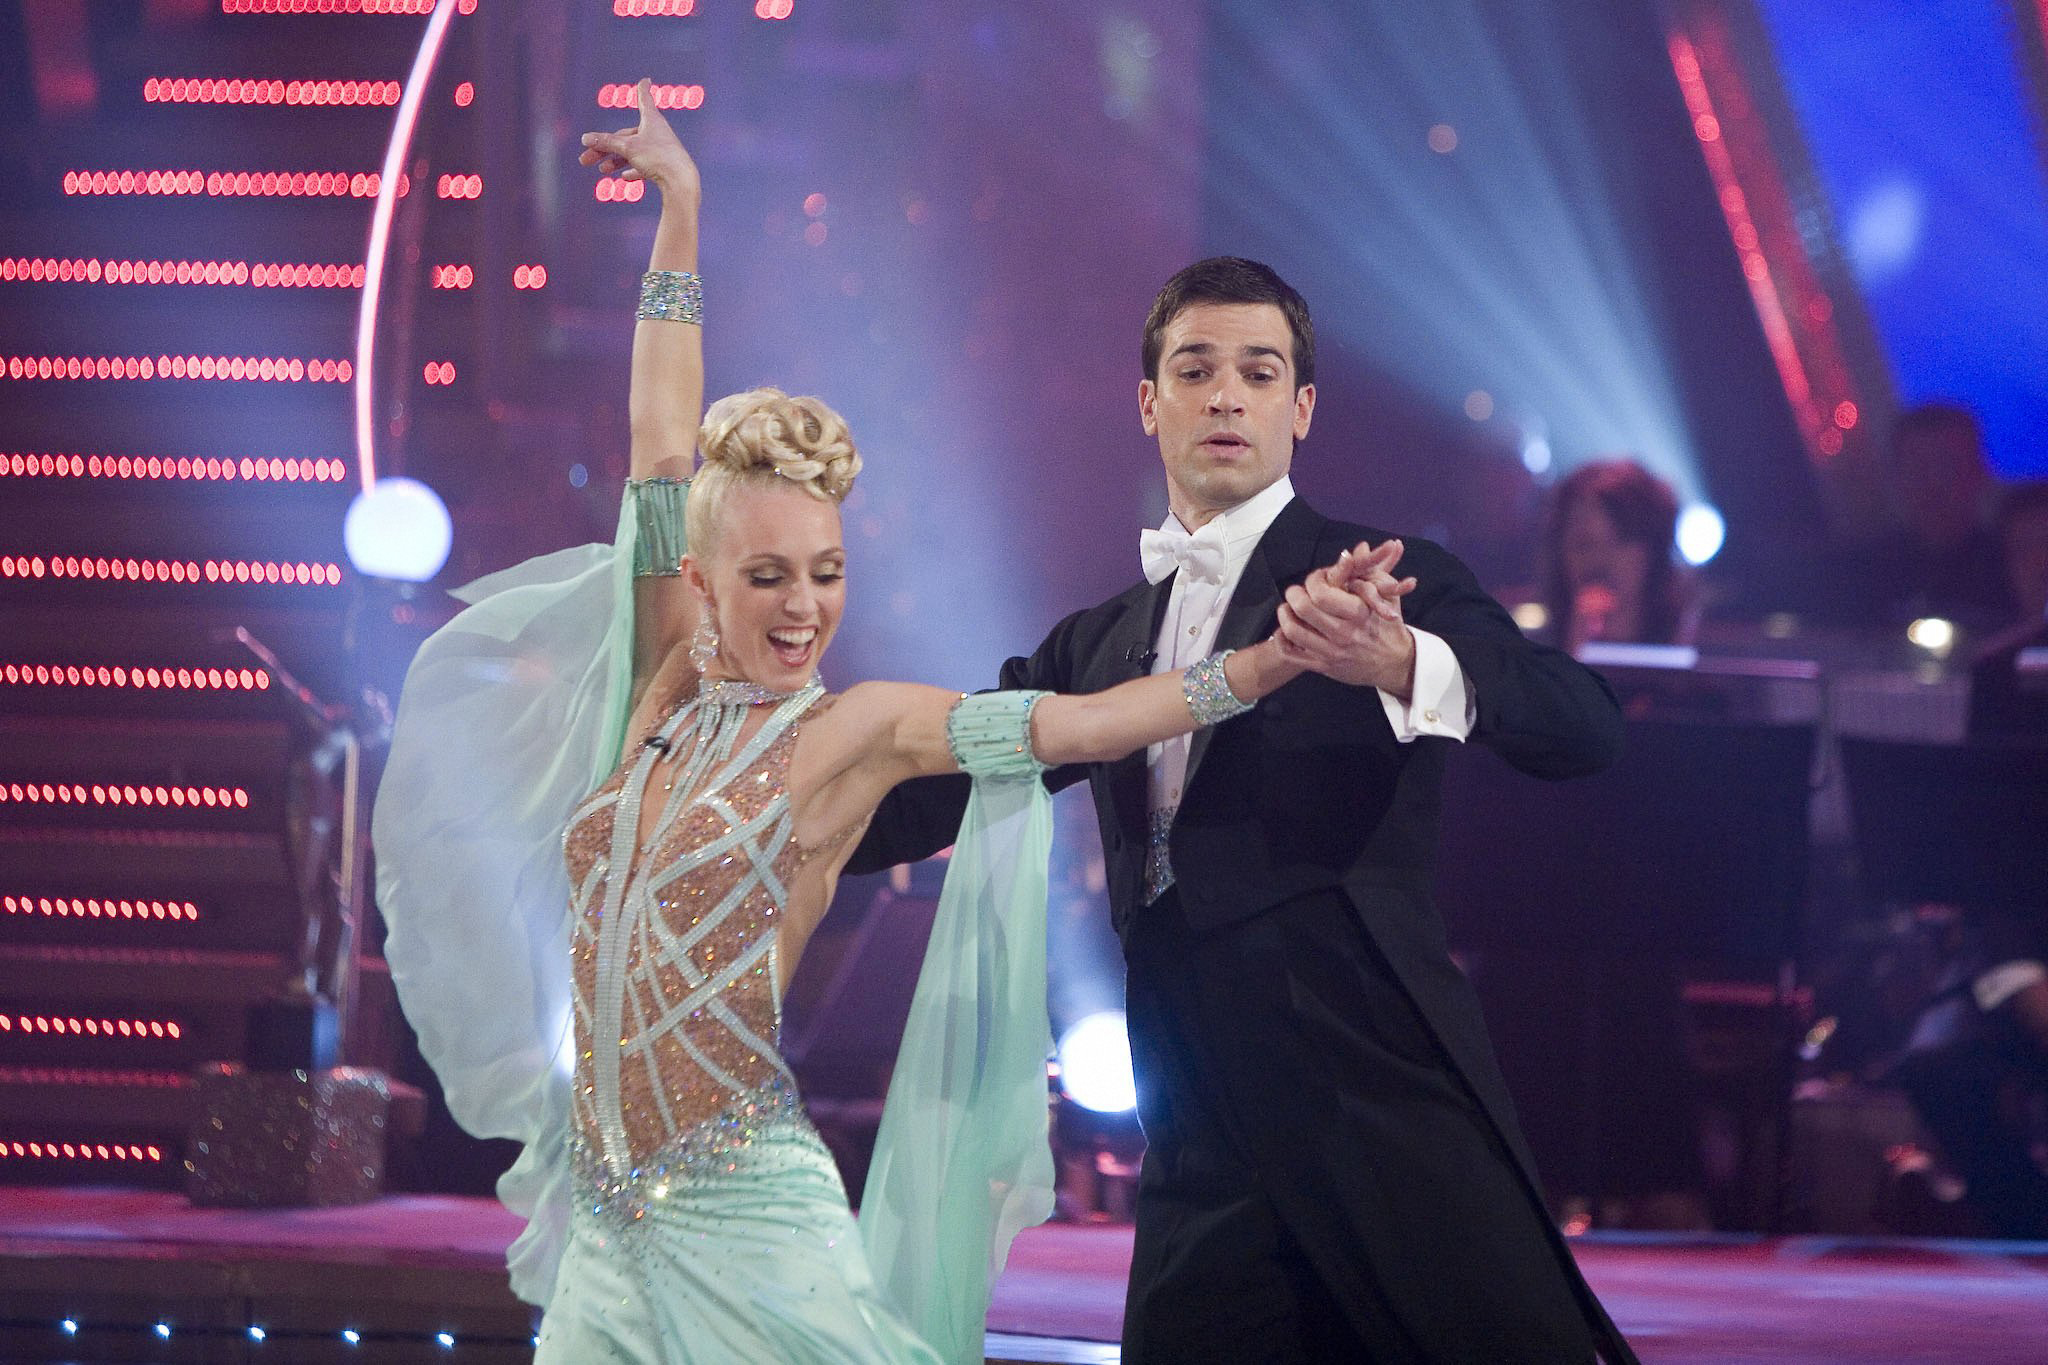 Camilla Dallerup and Gethin Jones performing a ballroom routine in hold on Strictly Come Dancing